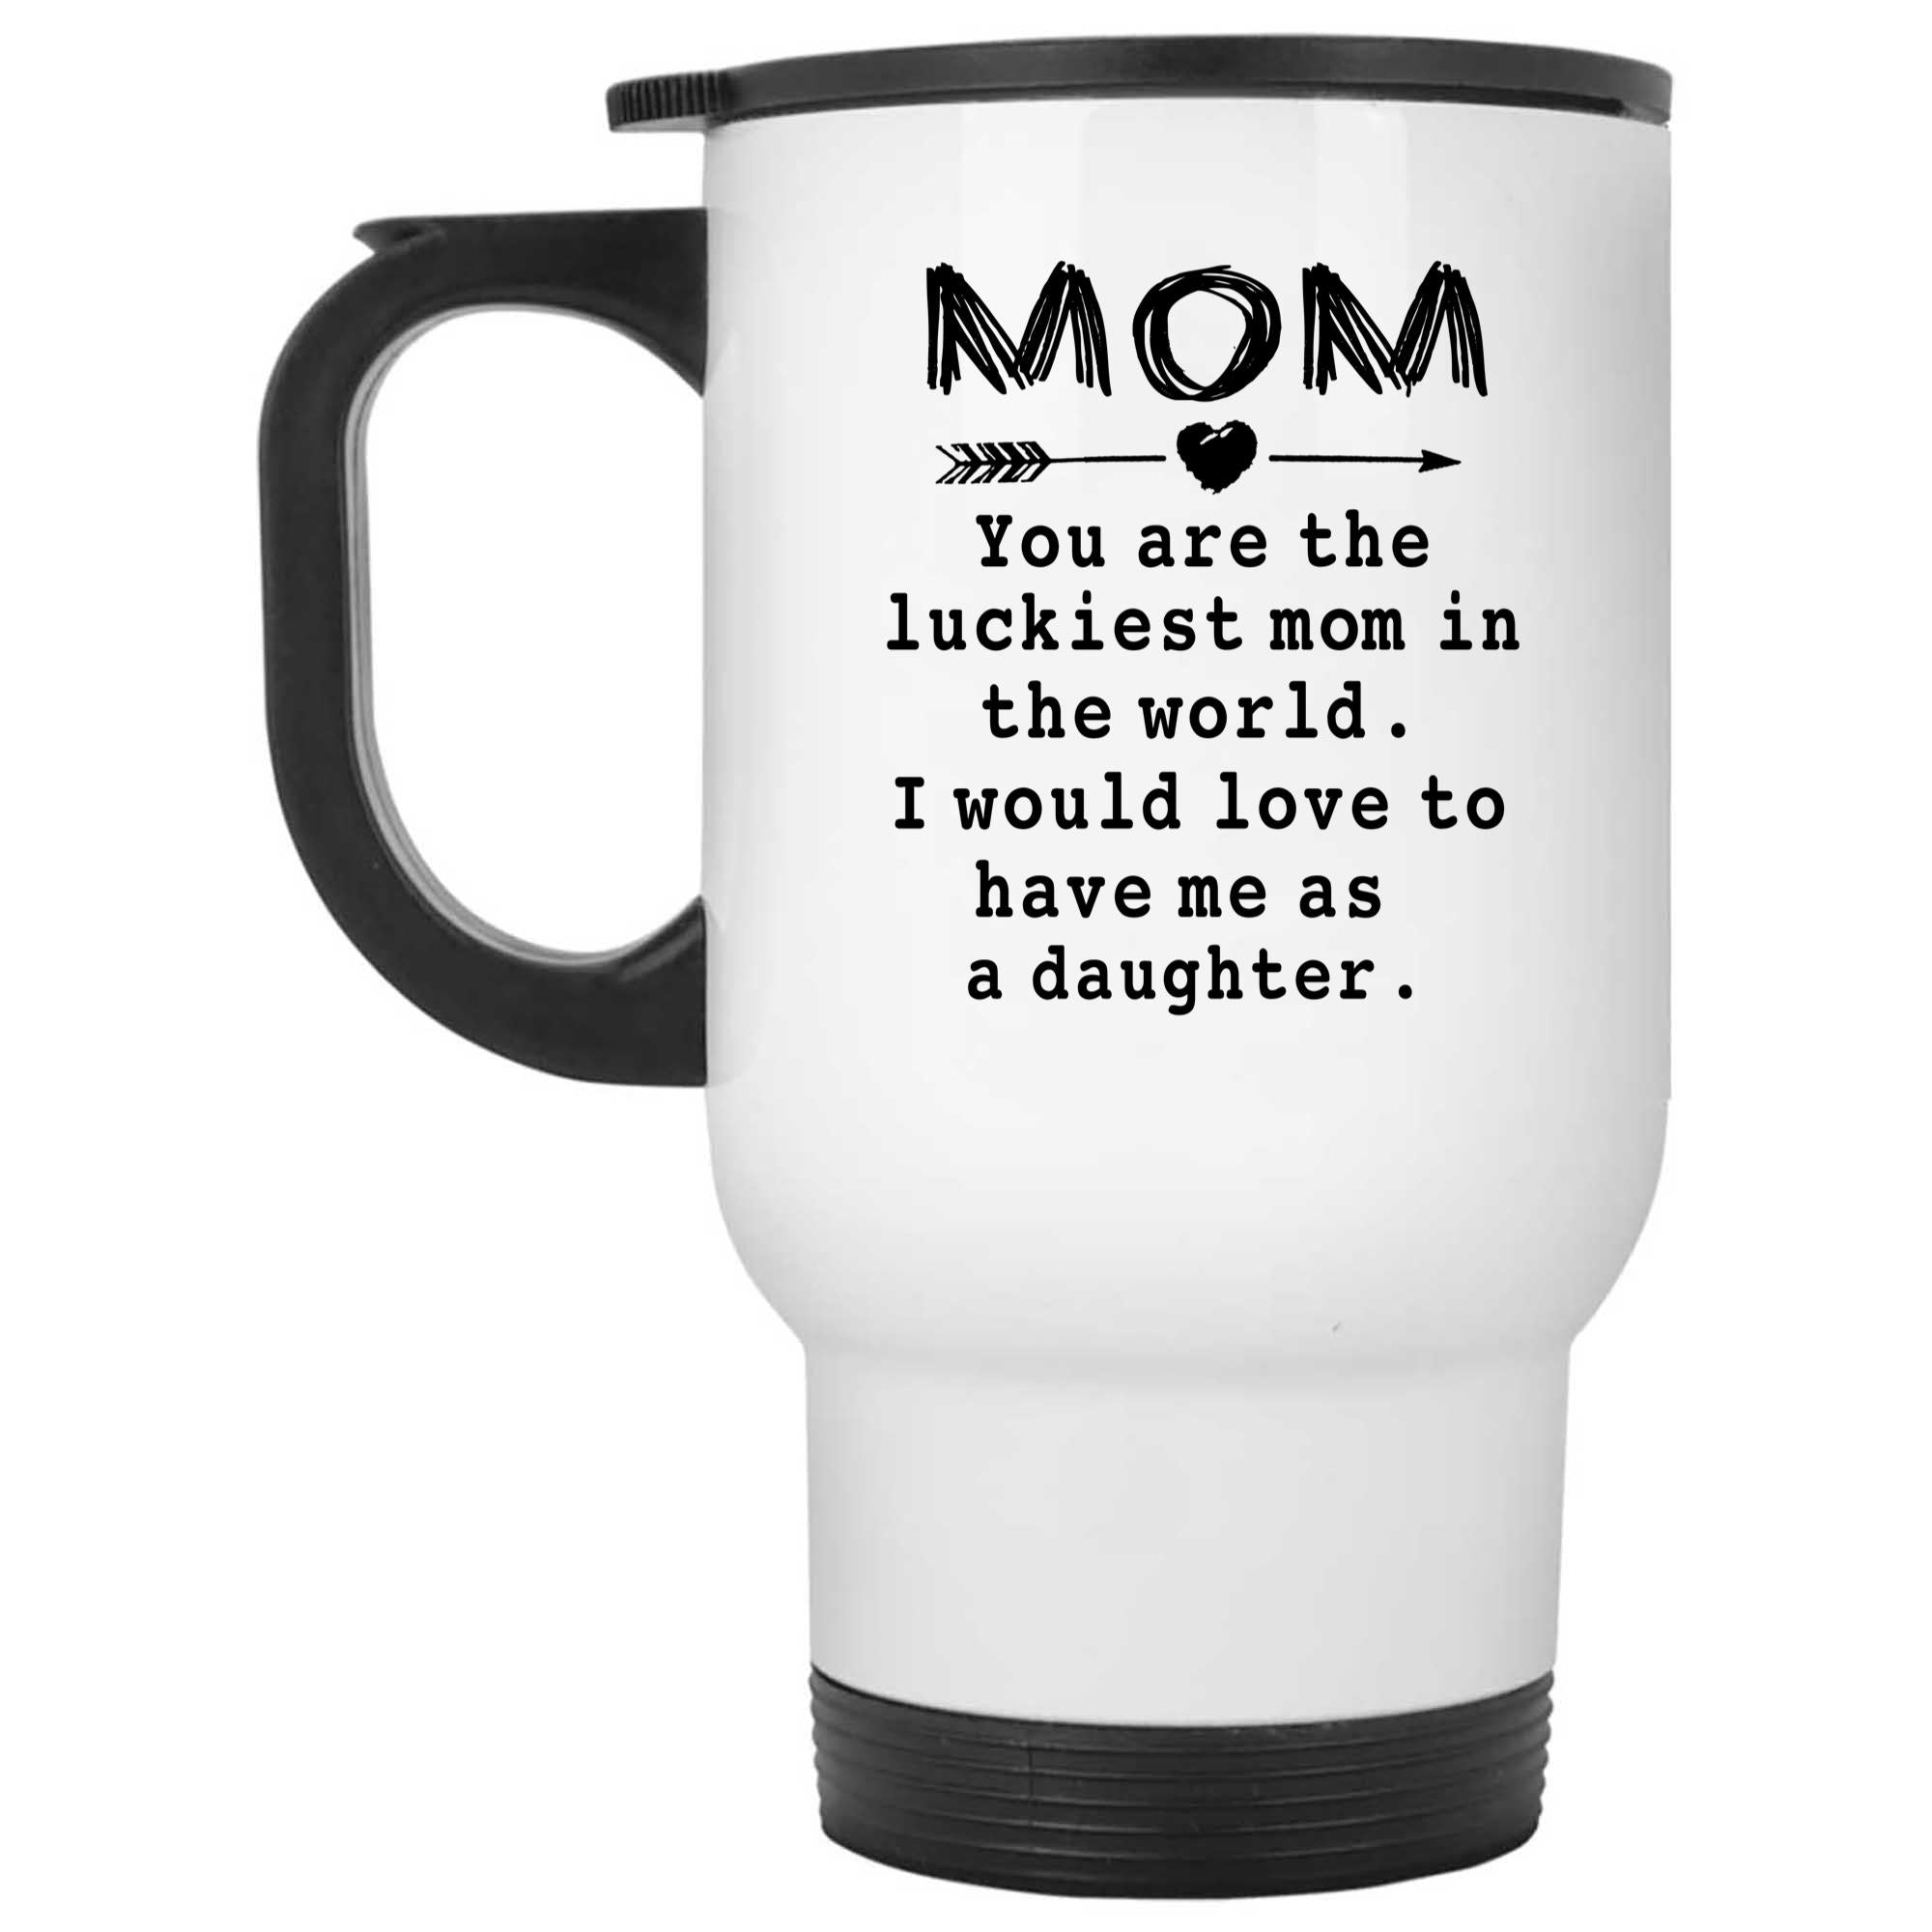 Skitongifts Funny Ceramic Novelty Coffee Mug You're The Luckiest Mom In The World. I Would Love To Have Me As A Daughter Mothers Day Gifts Ideas